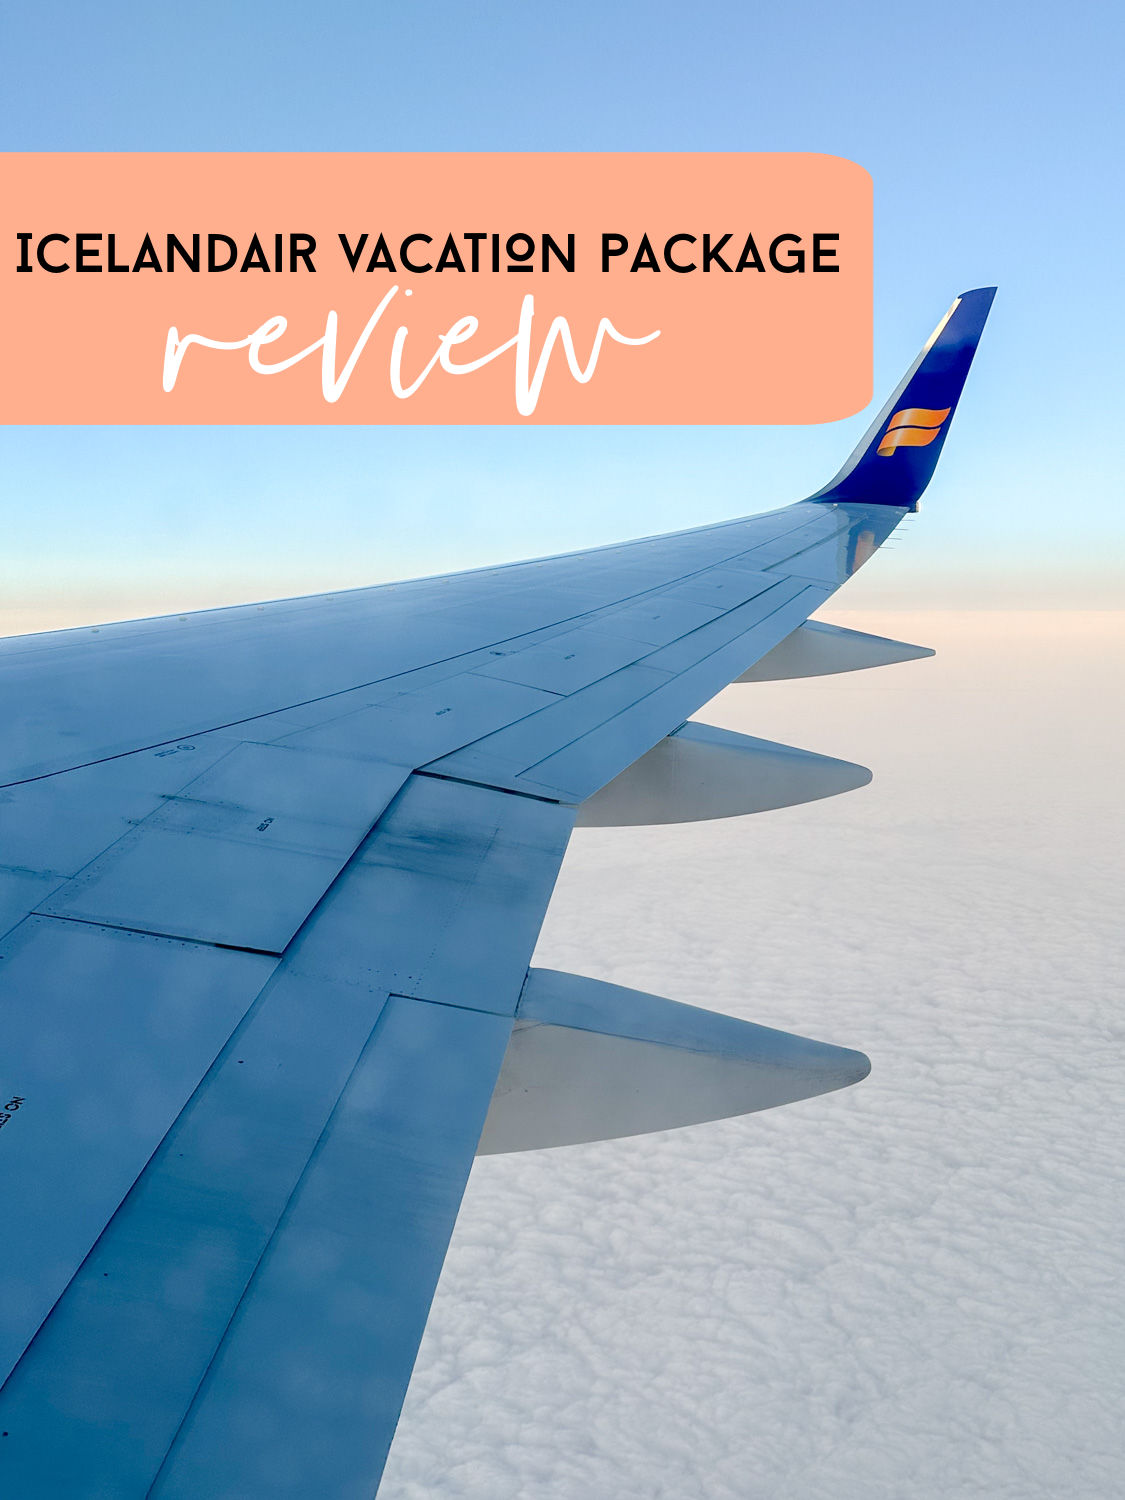 Icelandair vacation package review, Golden Circle City Break package review